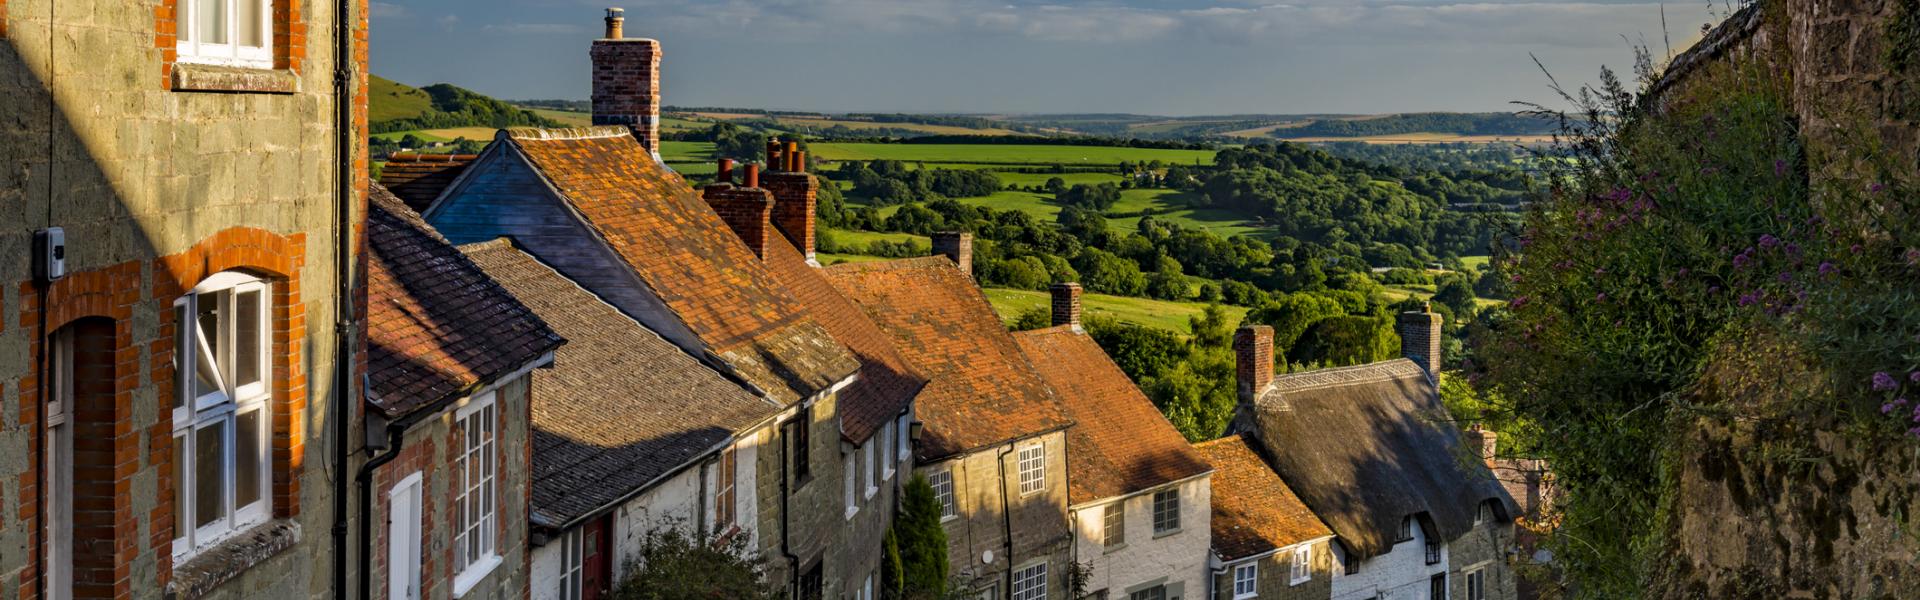 Holiday lettings & accommodation in Blandford Forum - HomeToGo